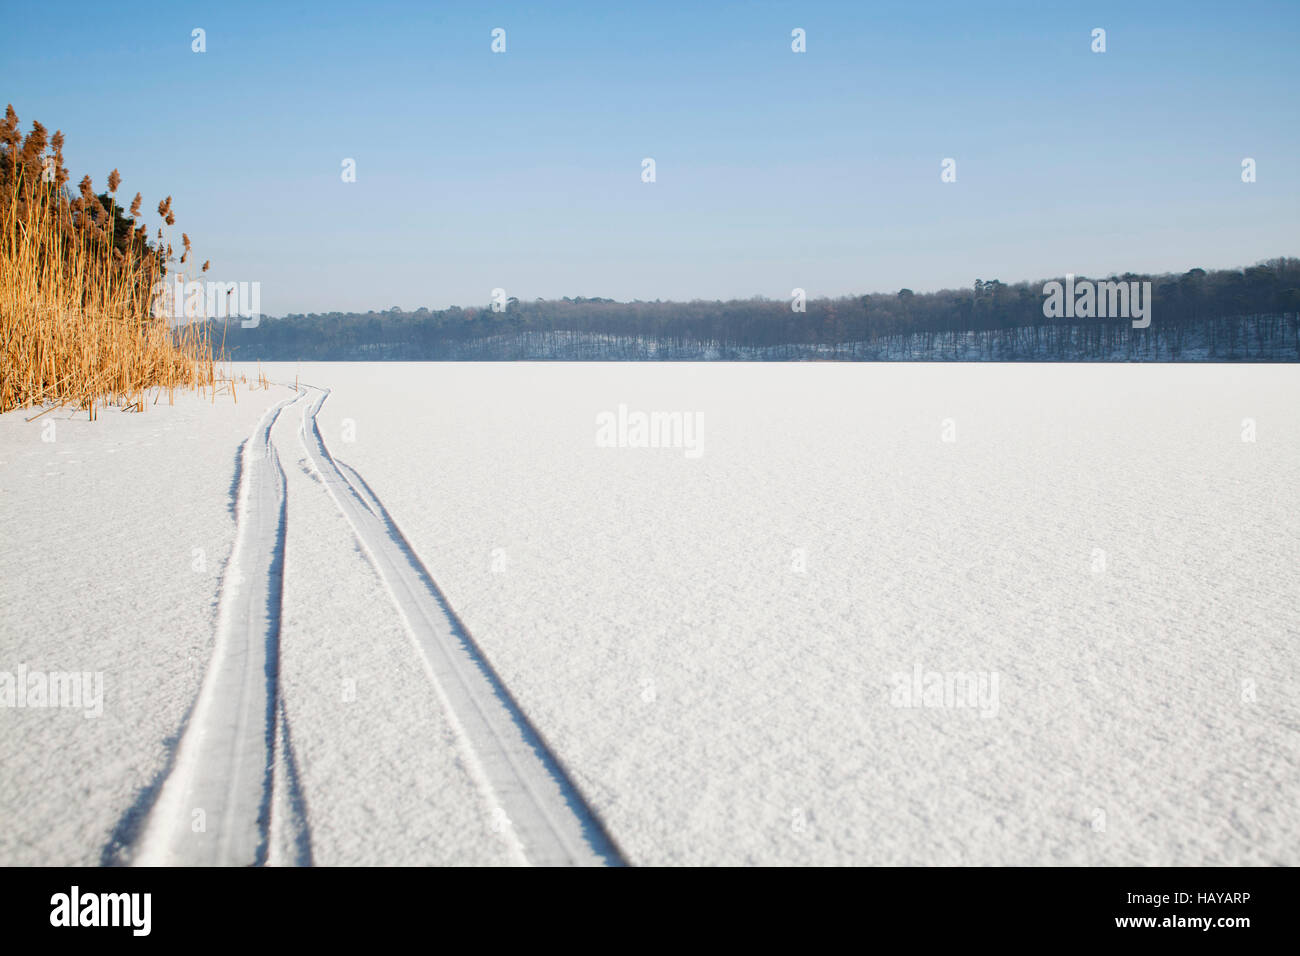 traces of ski on snow cover, beautiful winter landscape Stock Photo